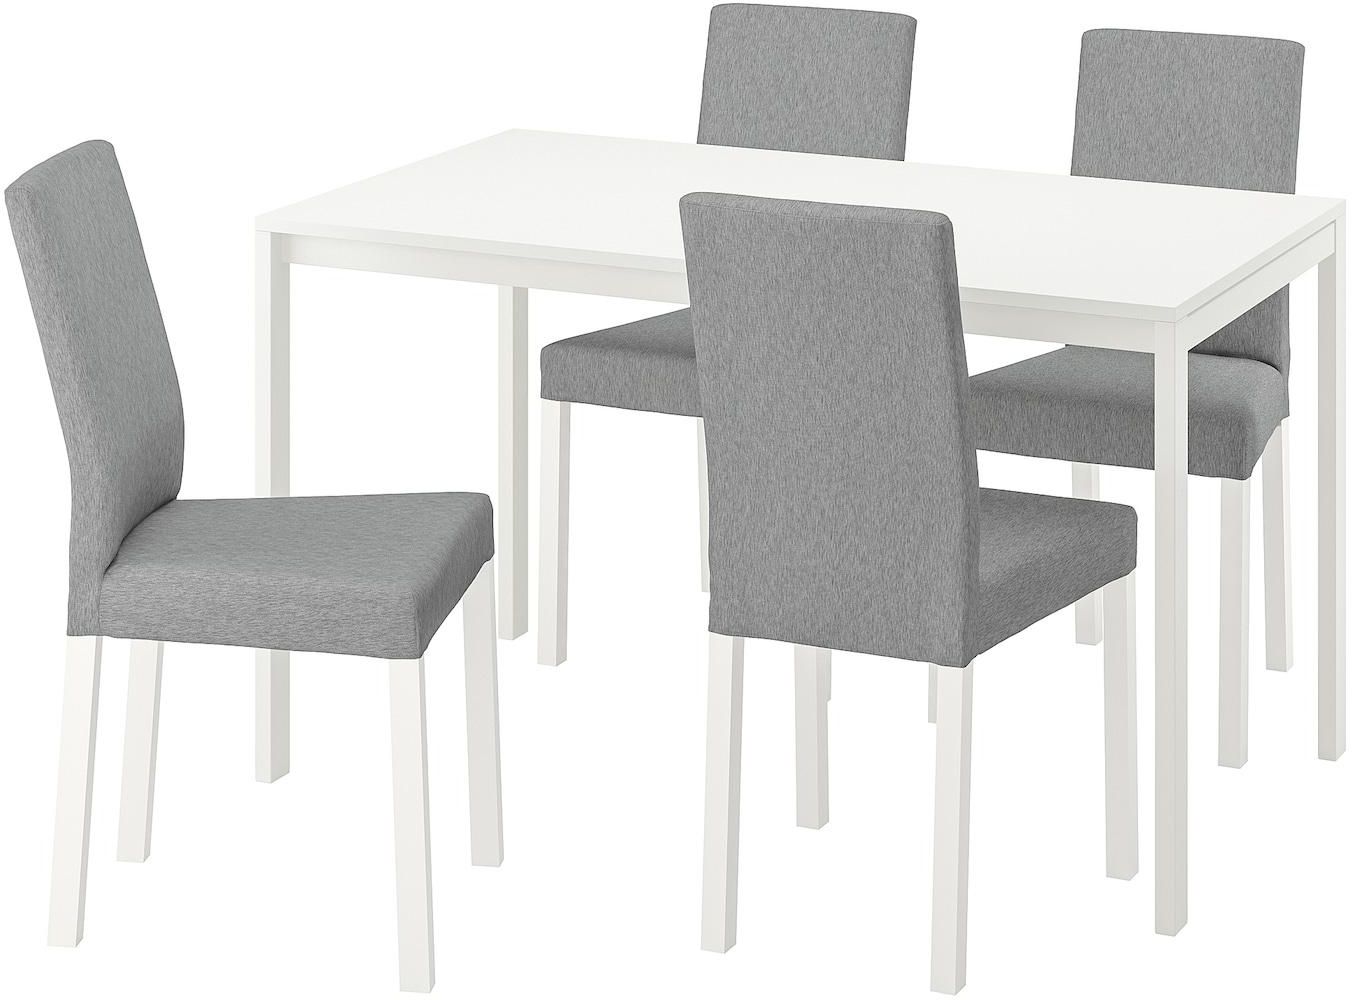 MELLTORP / KÄTTIL Table and 4 chairs - white/Knisa light grey 125 cm